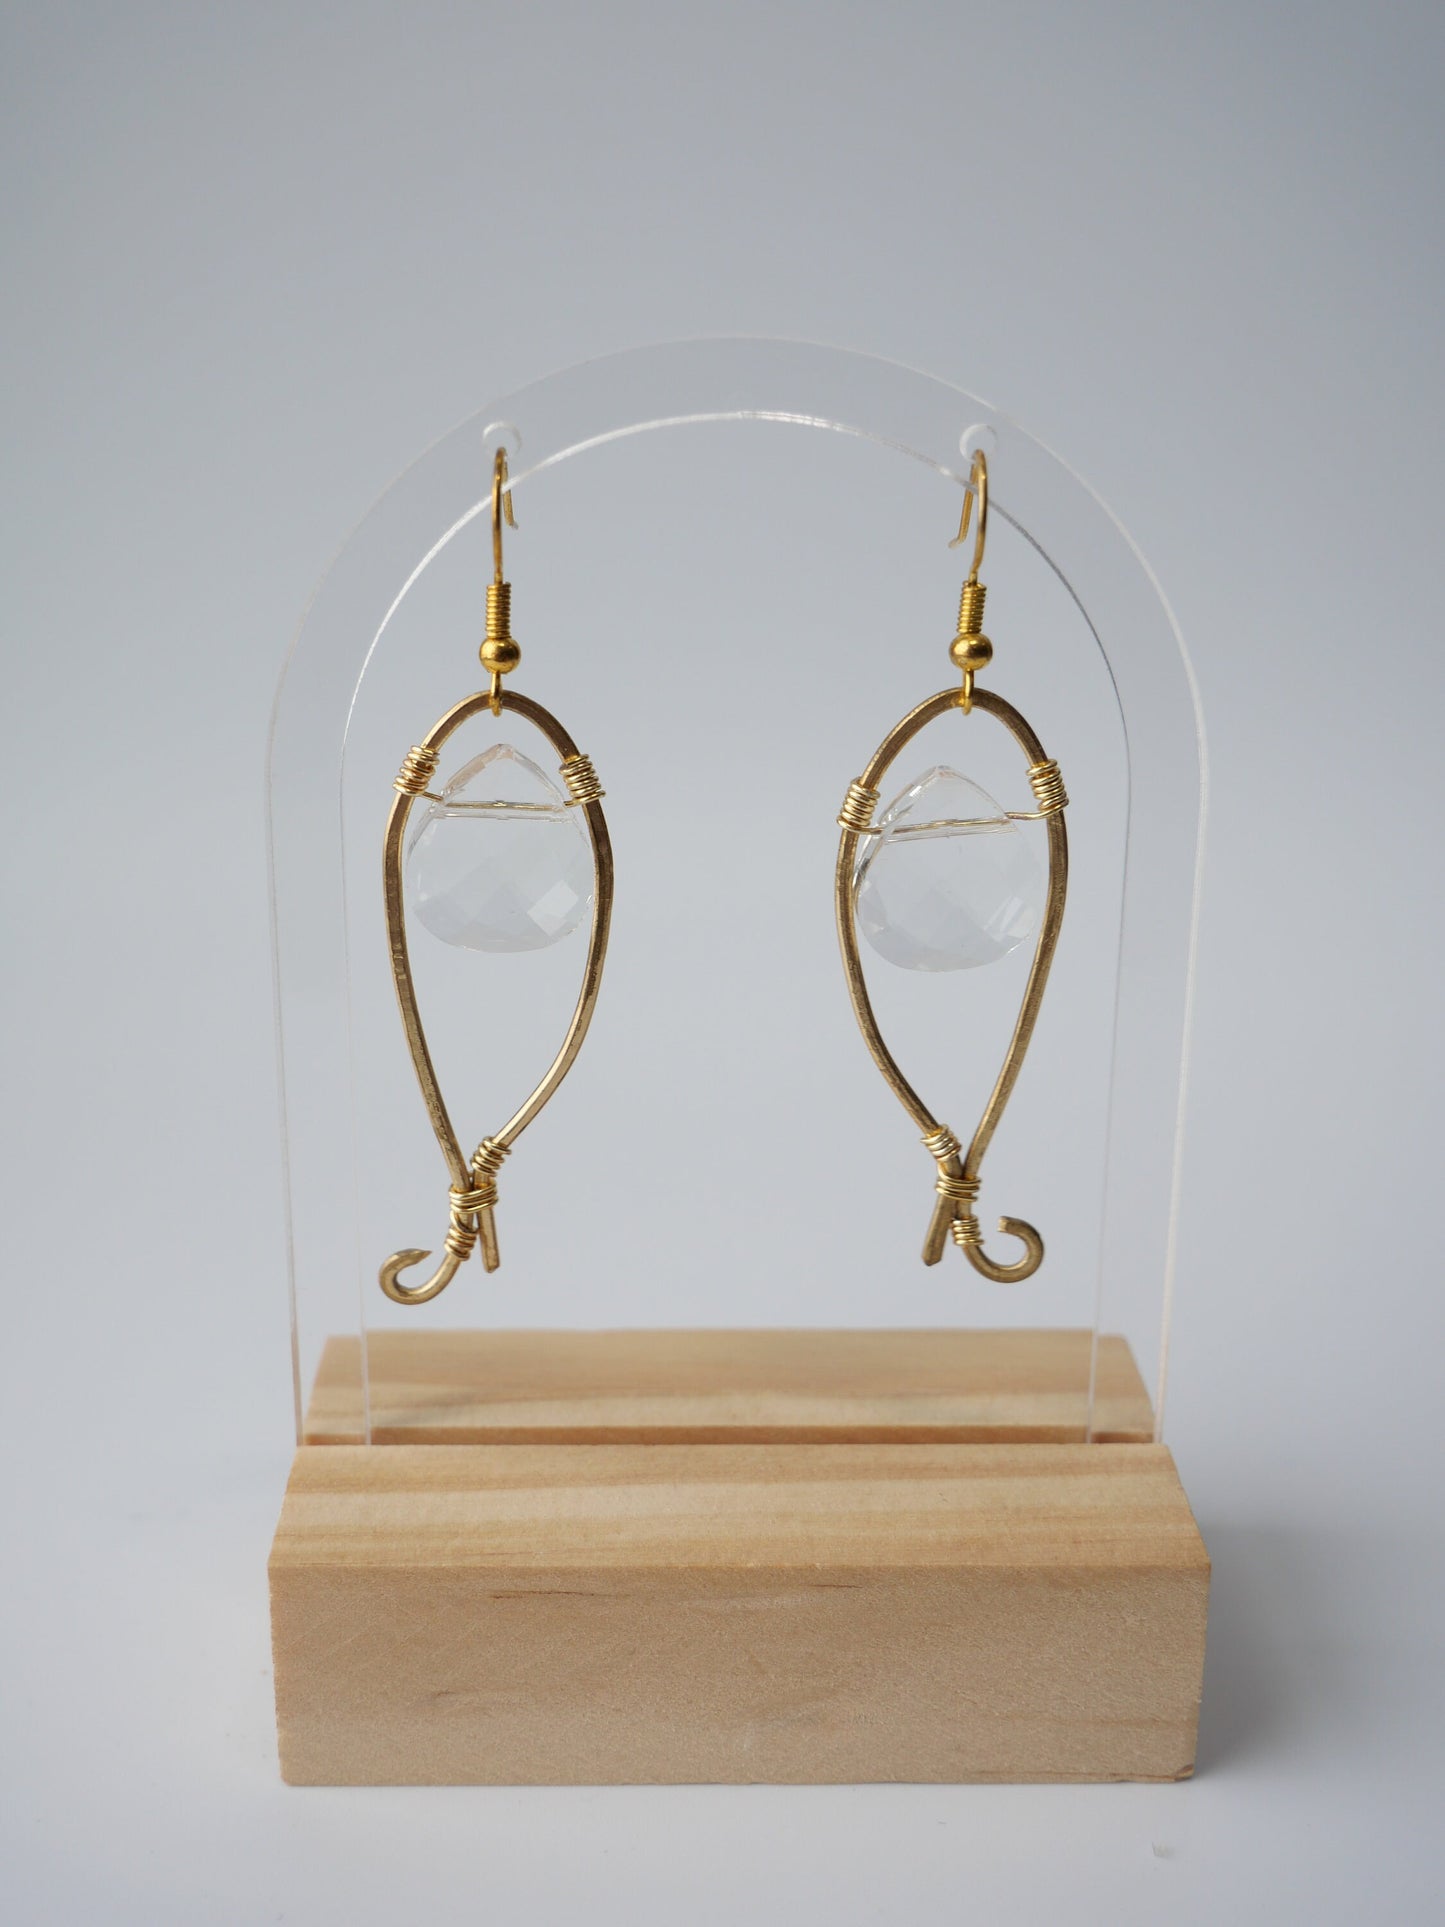 Gold and Crystal Glass bead earrings, Statement Large Gold Earrings, Hand Made Earrings. Made in Maine